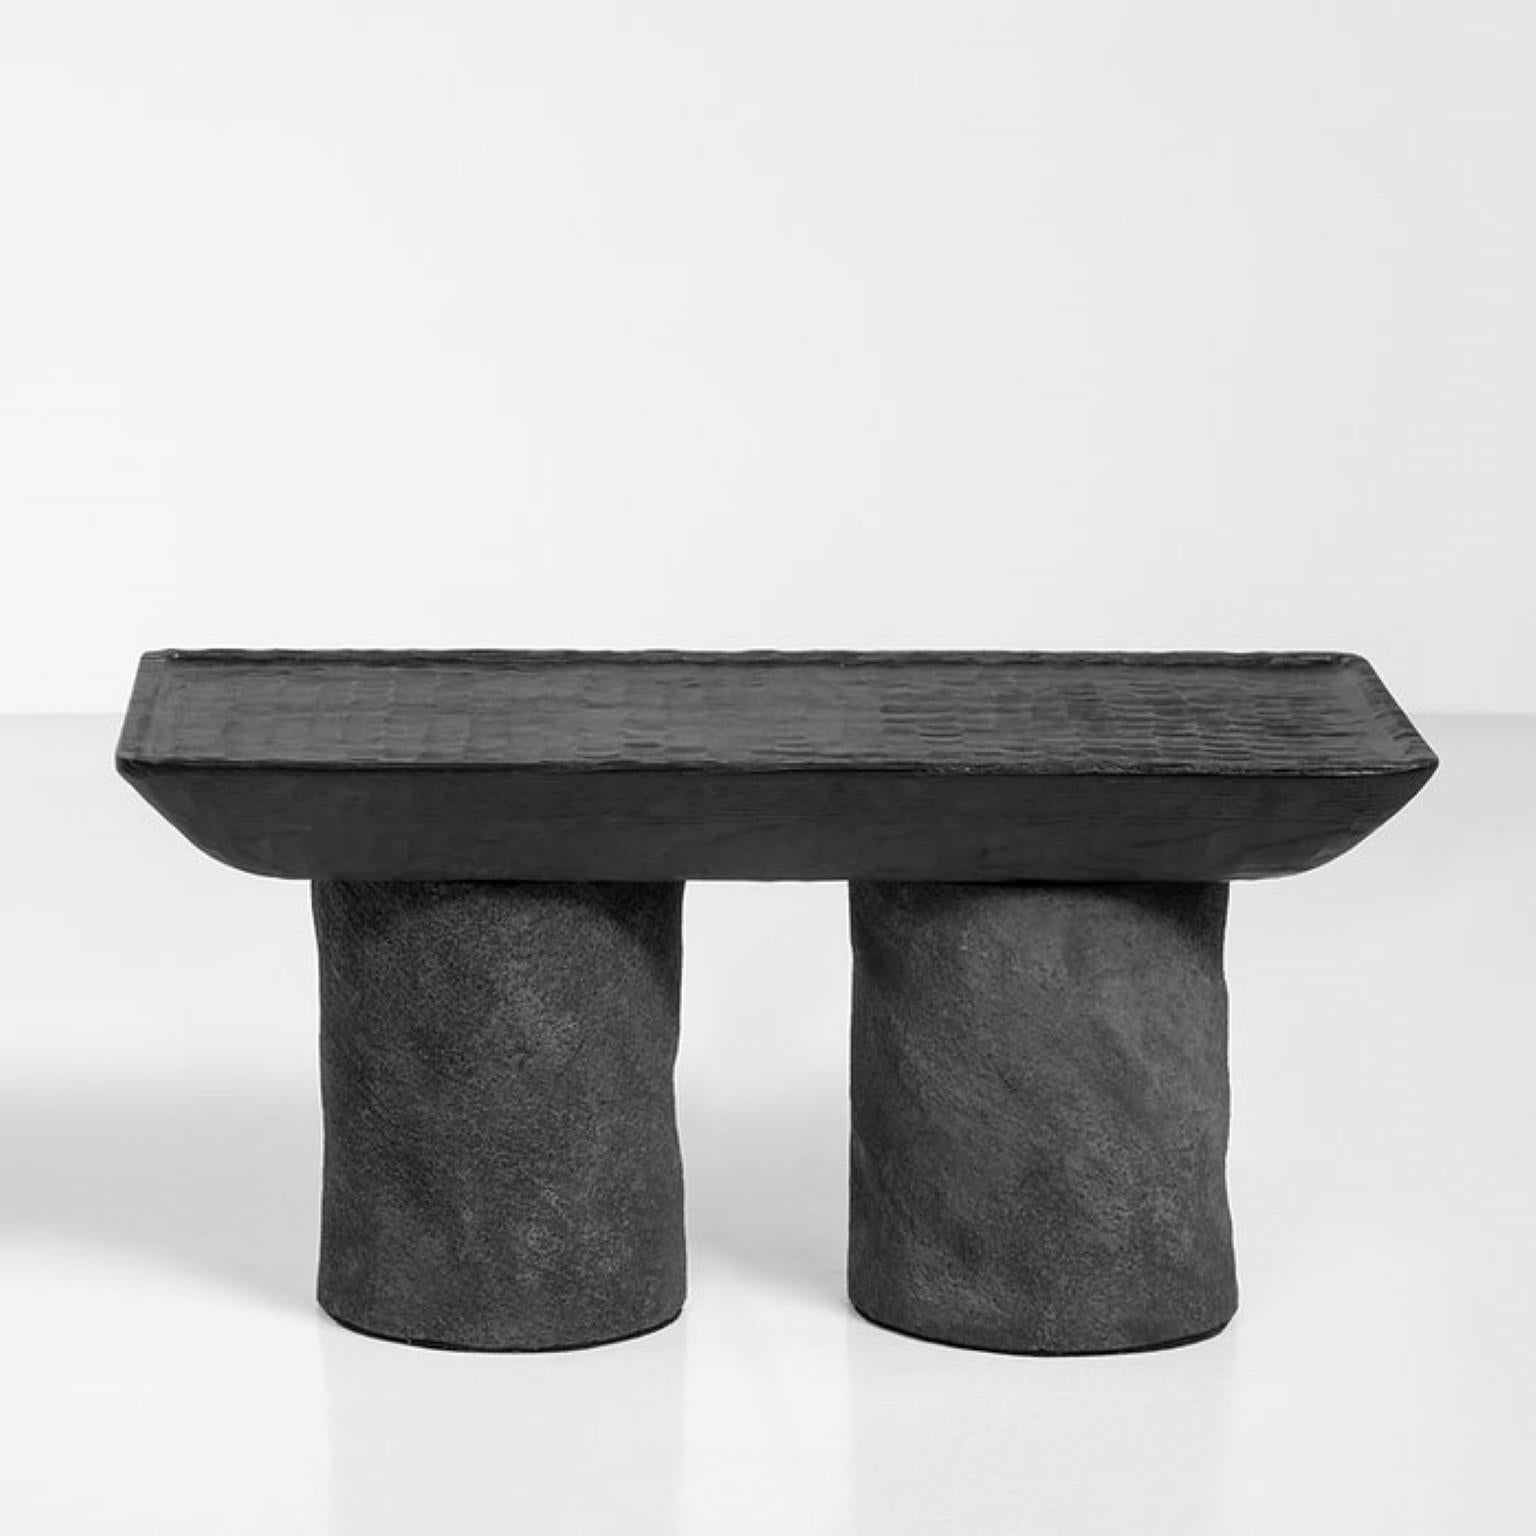 Korotun coffee table by Faina.
Design: Victoriya Yakusha
Materials: clay, wood.
Dimensions: W 75 x D 42 x H 35 cm.

Almost carved in stone, minimalist coffee table with sharp outlines has sturdy character. With its authentic features Korotun—